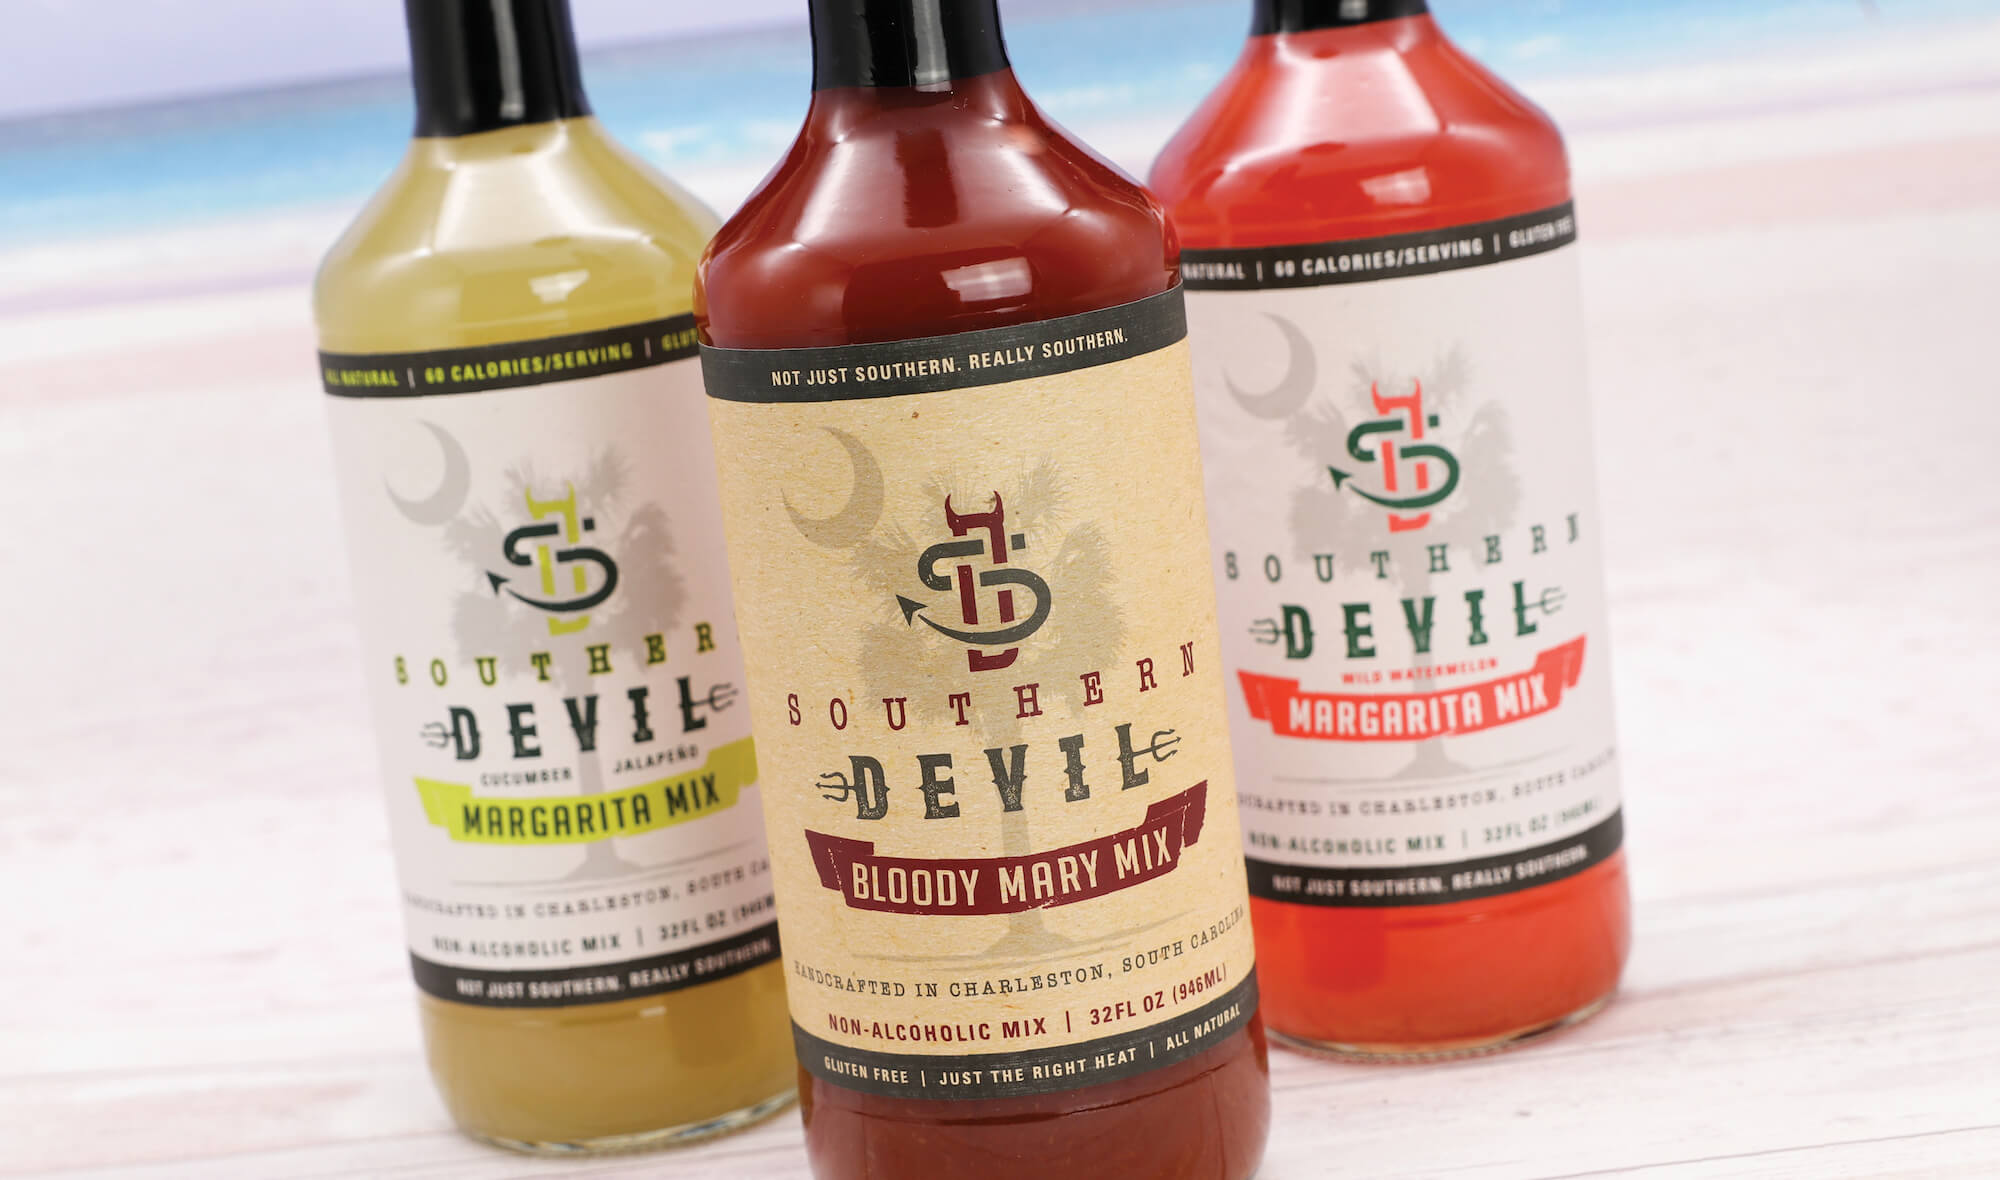 Southern Devil Mixers Bloody Mary mix and Margarita mix